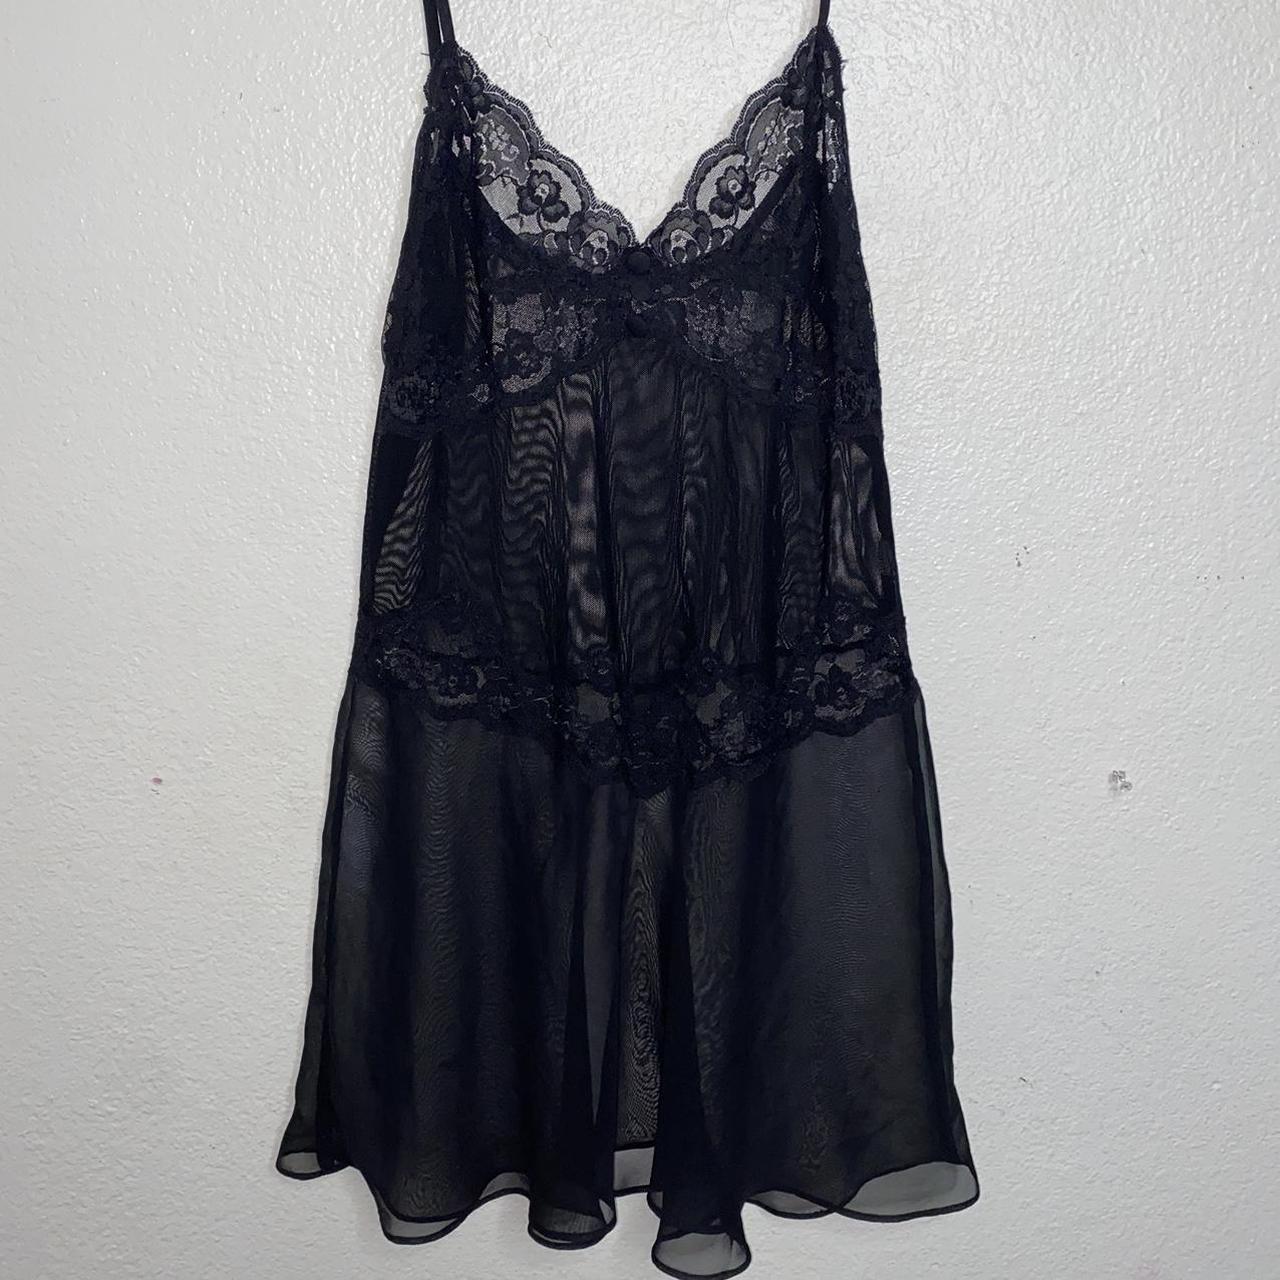 Lace & Mesh Slip 𝙲𝚘𝚗𝚍𝚒𝚝𝚒𝚘𝚗 Gently worn once for a... - Depop